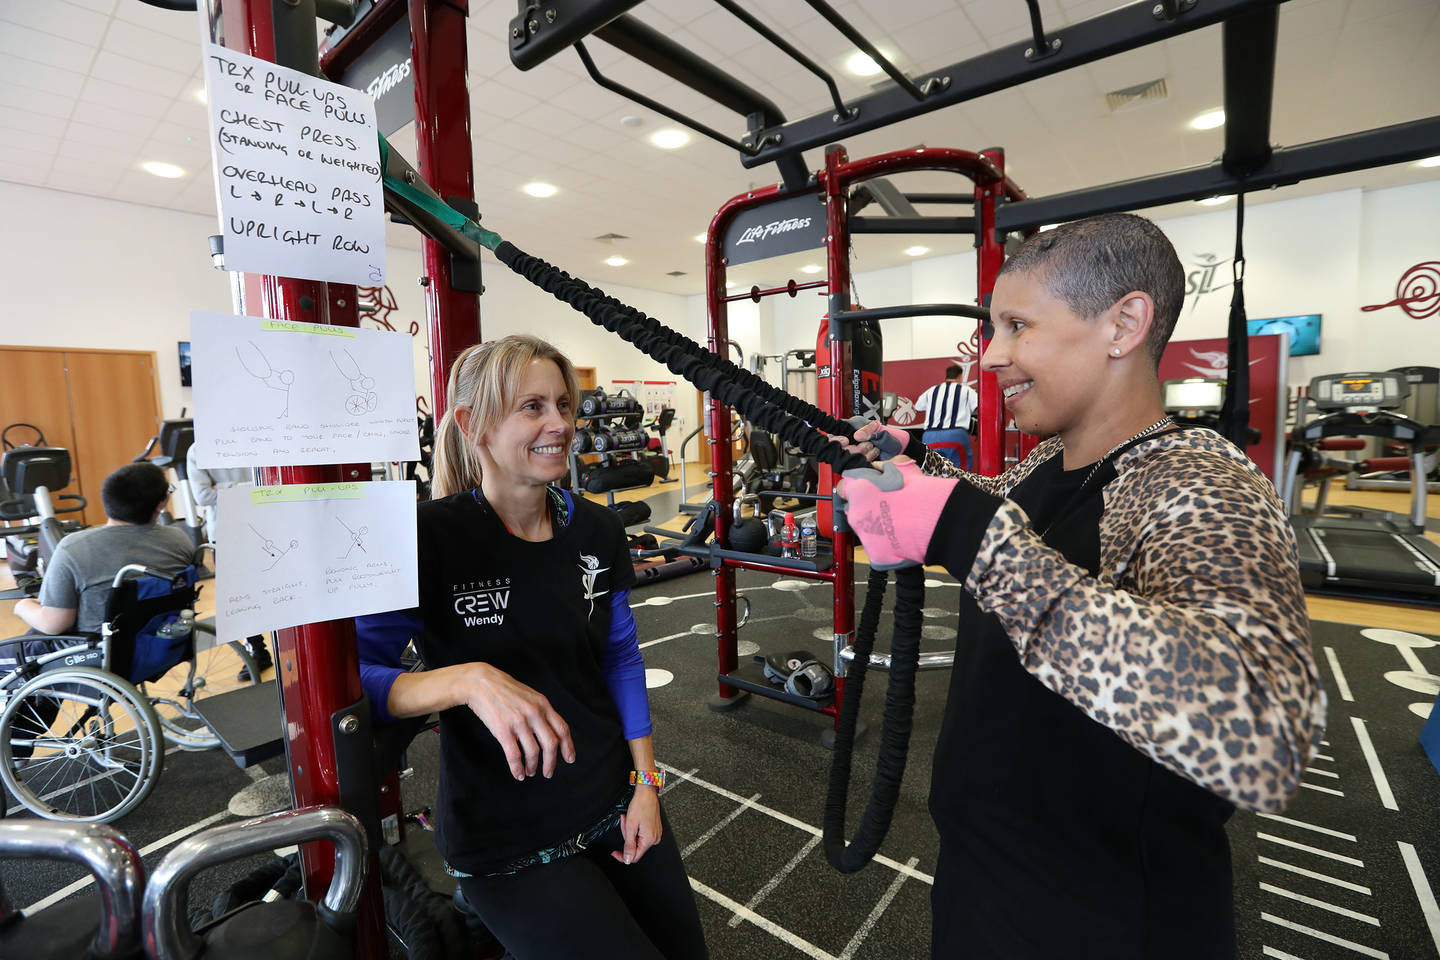 Gym instructor Wendy supporting lady using weights machine in gym